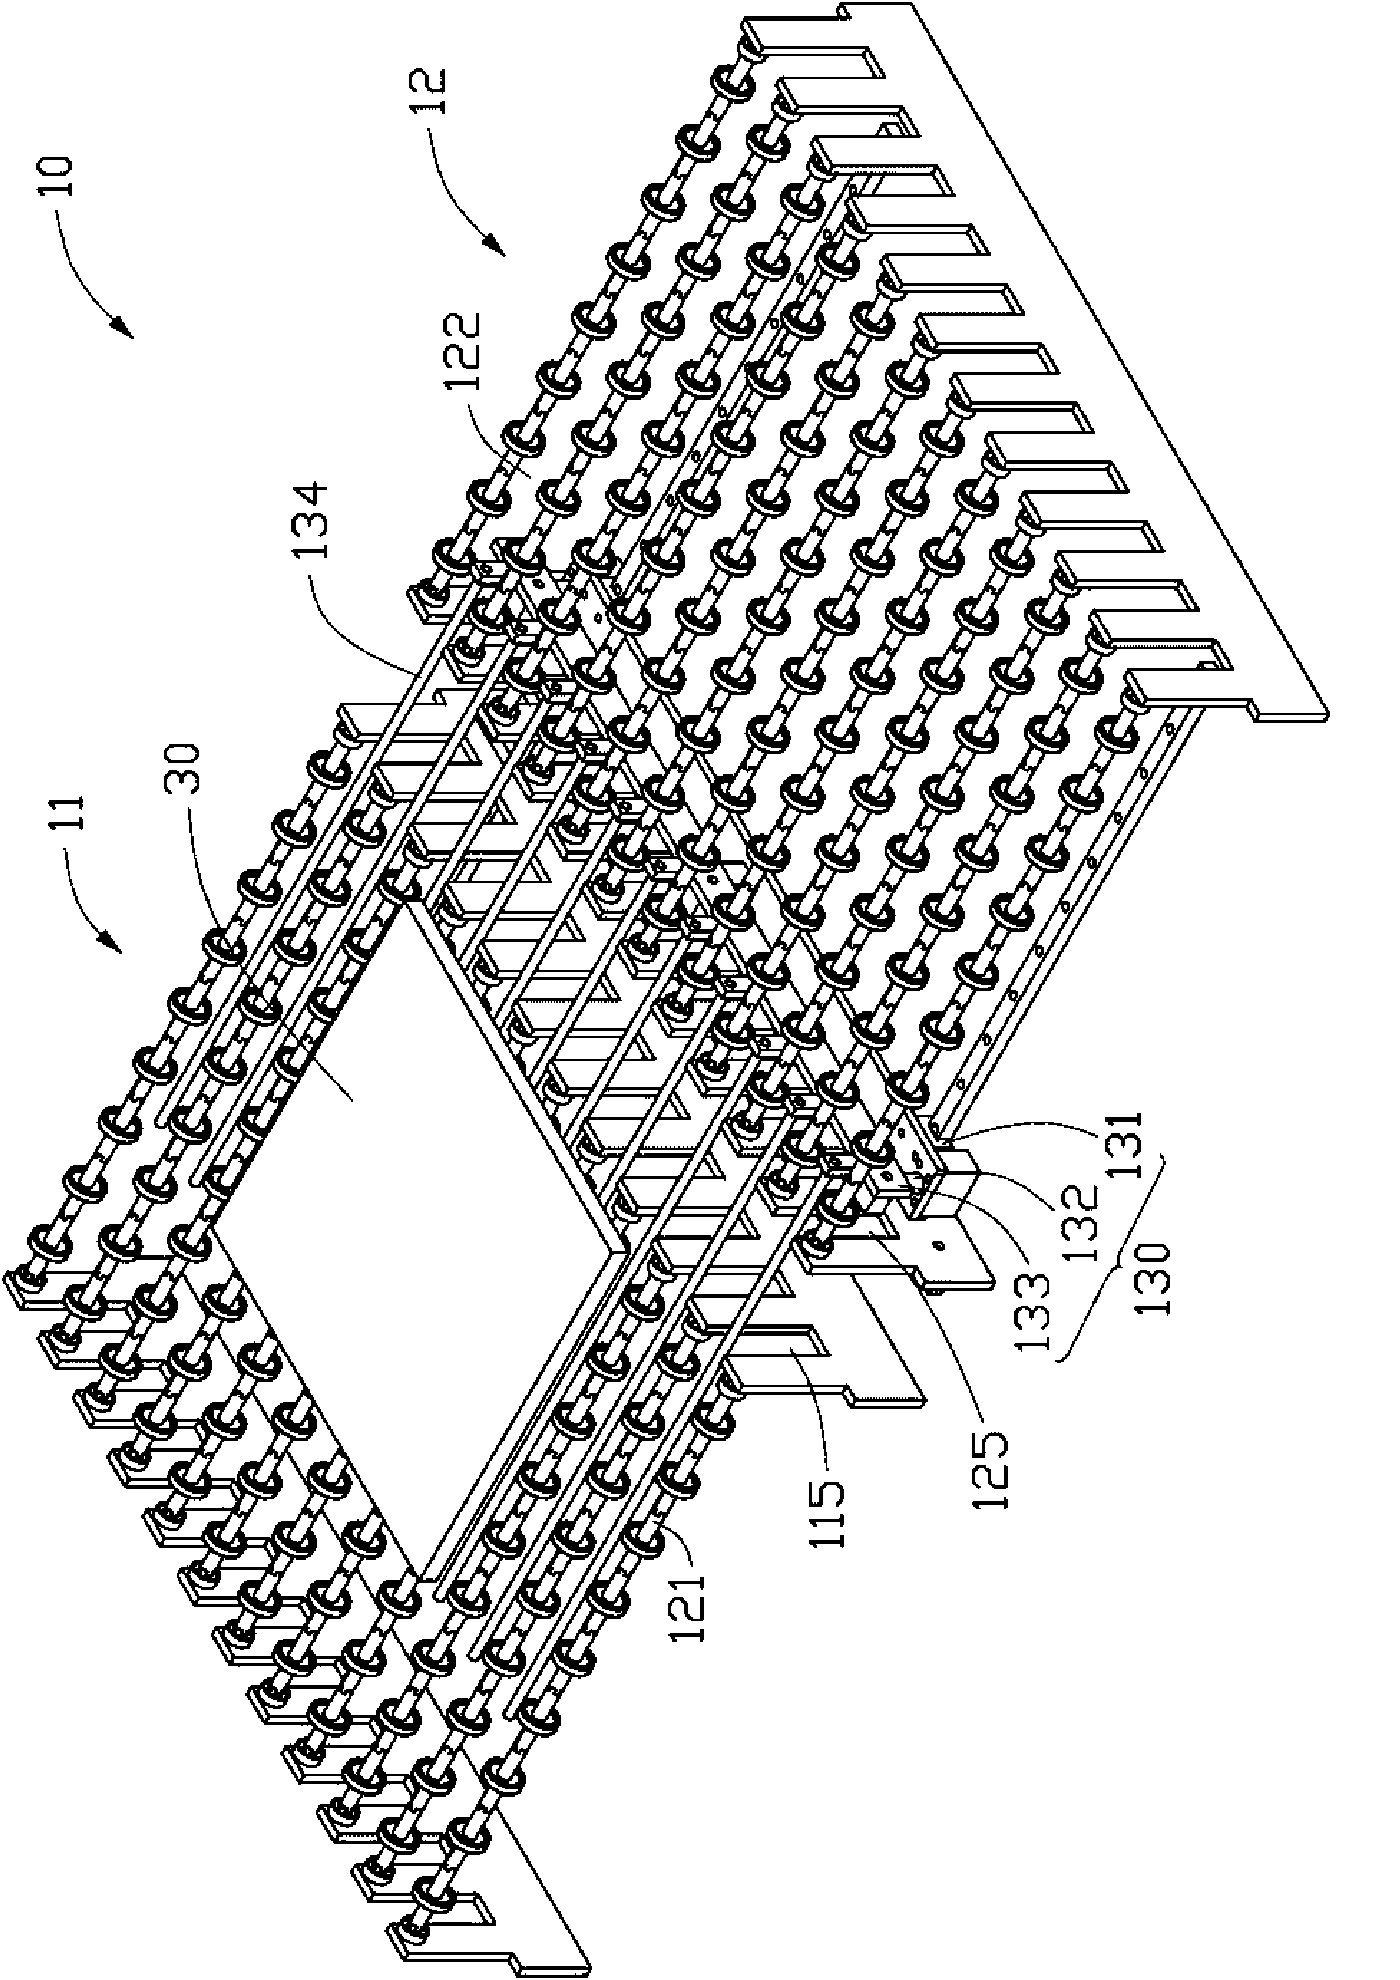 Substrate conveying system